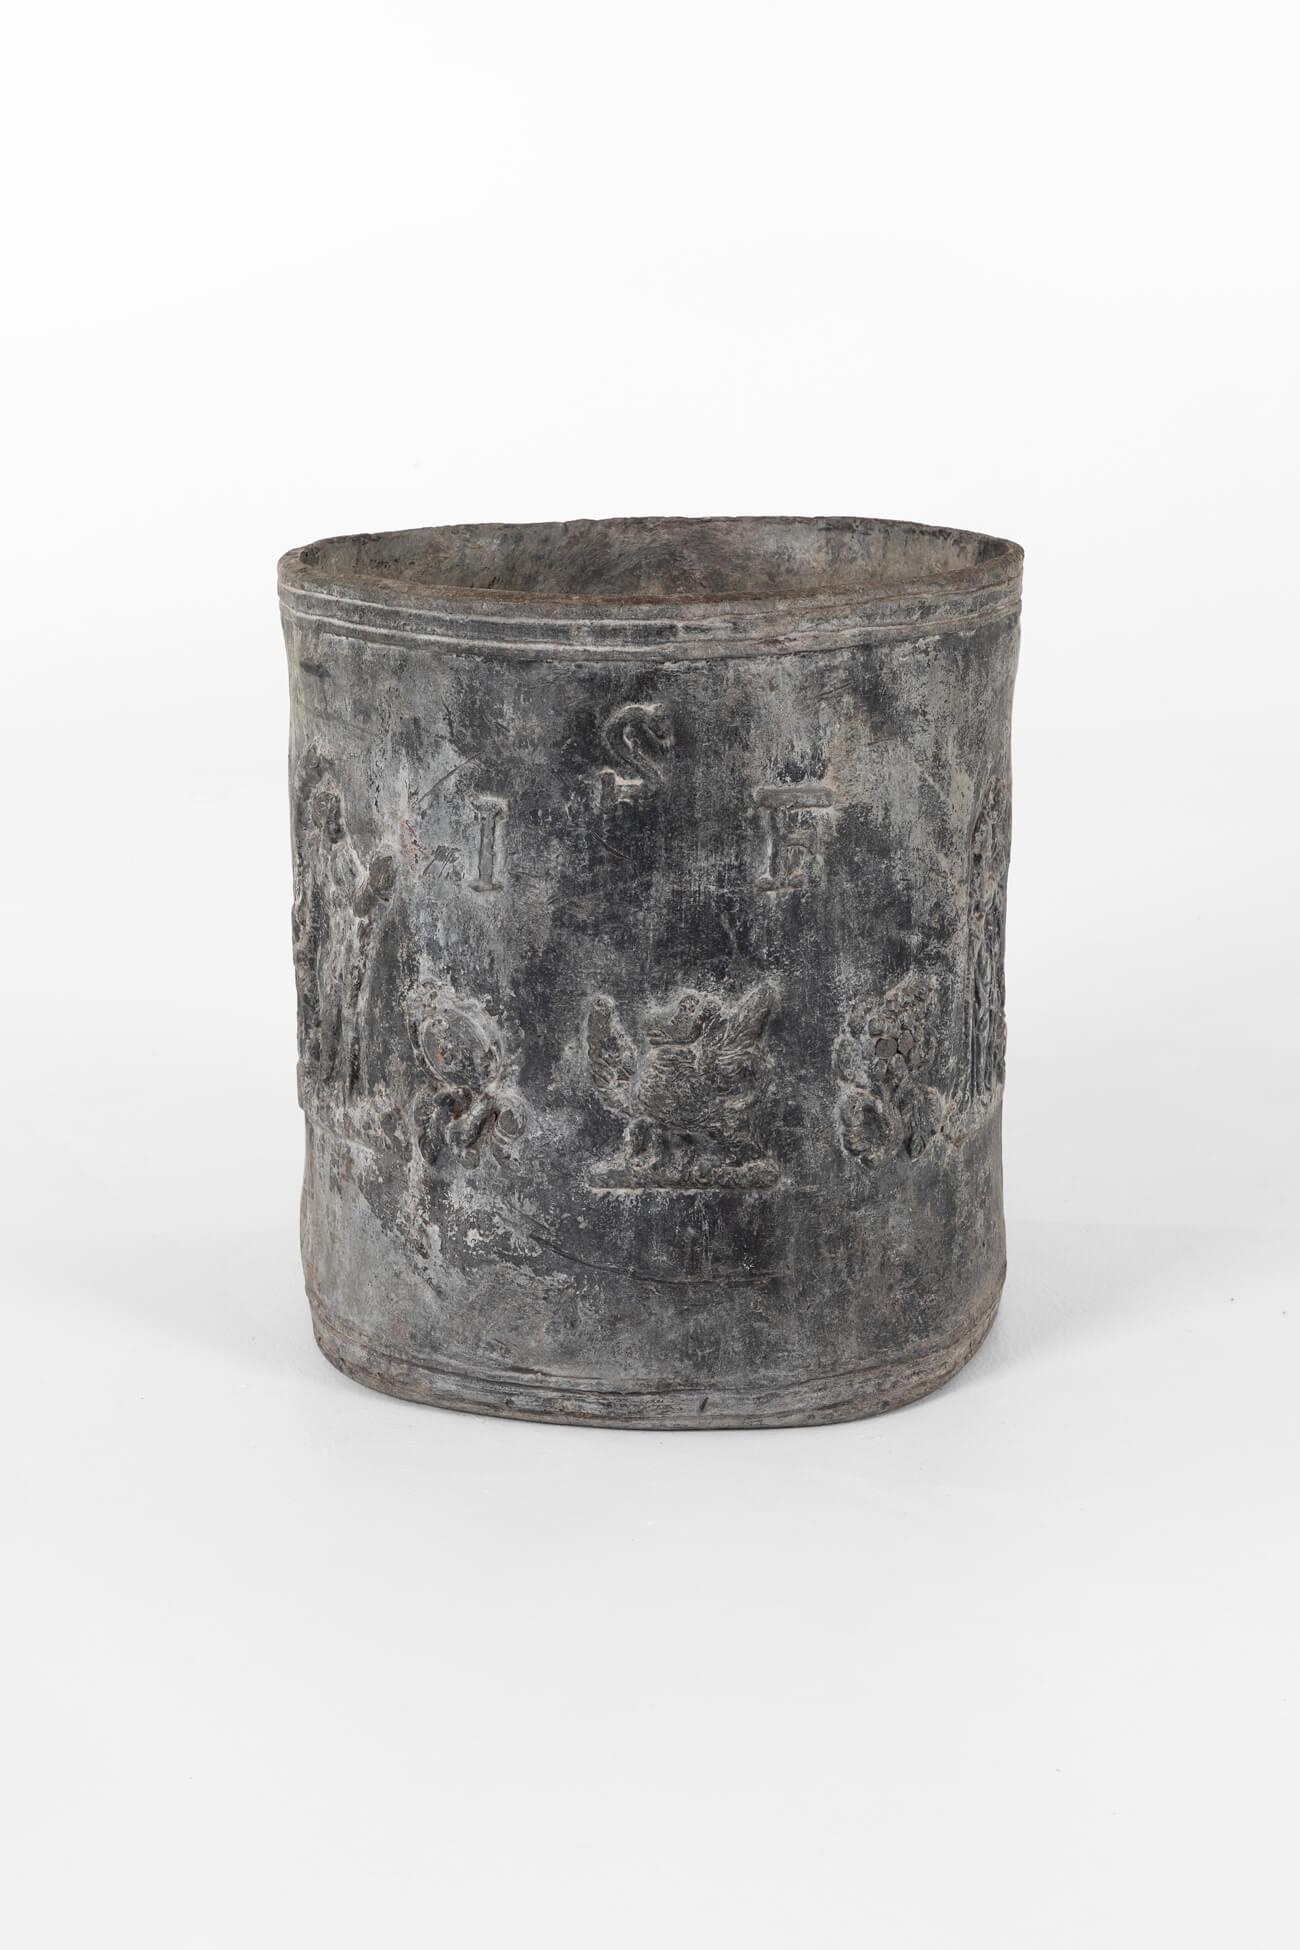 A splendid late 18th-century large lead cylindrical planter.

The sides of the planter display scenes of classical figures and flowing vines with a central eagle motif on one side. The other side displays the initials I.S.F which almost certainly